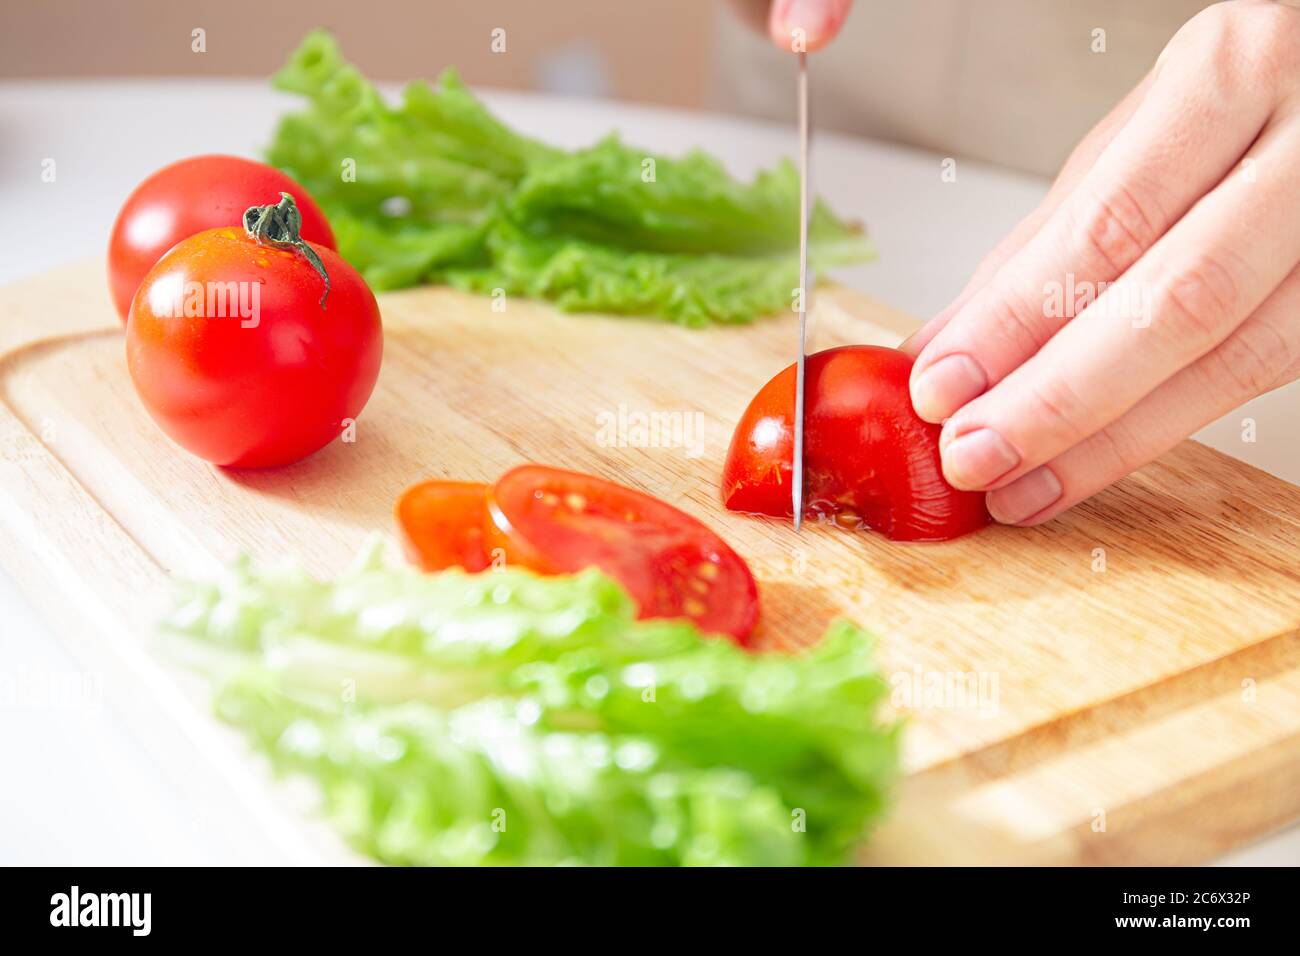 https://c8.alamy.com/comp/2C6X32P/elegant-hands-of-a-young-girl-cut-juicy-red-tomato-into-halves-on-a-wooden-cutting-board-preparation-of-ingredients-and-vegetables-organic-products-2C6X32P.jpg